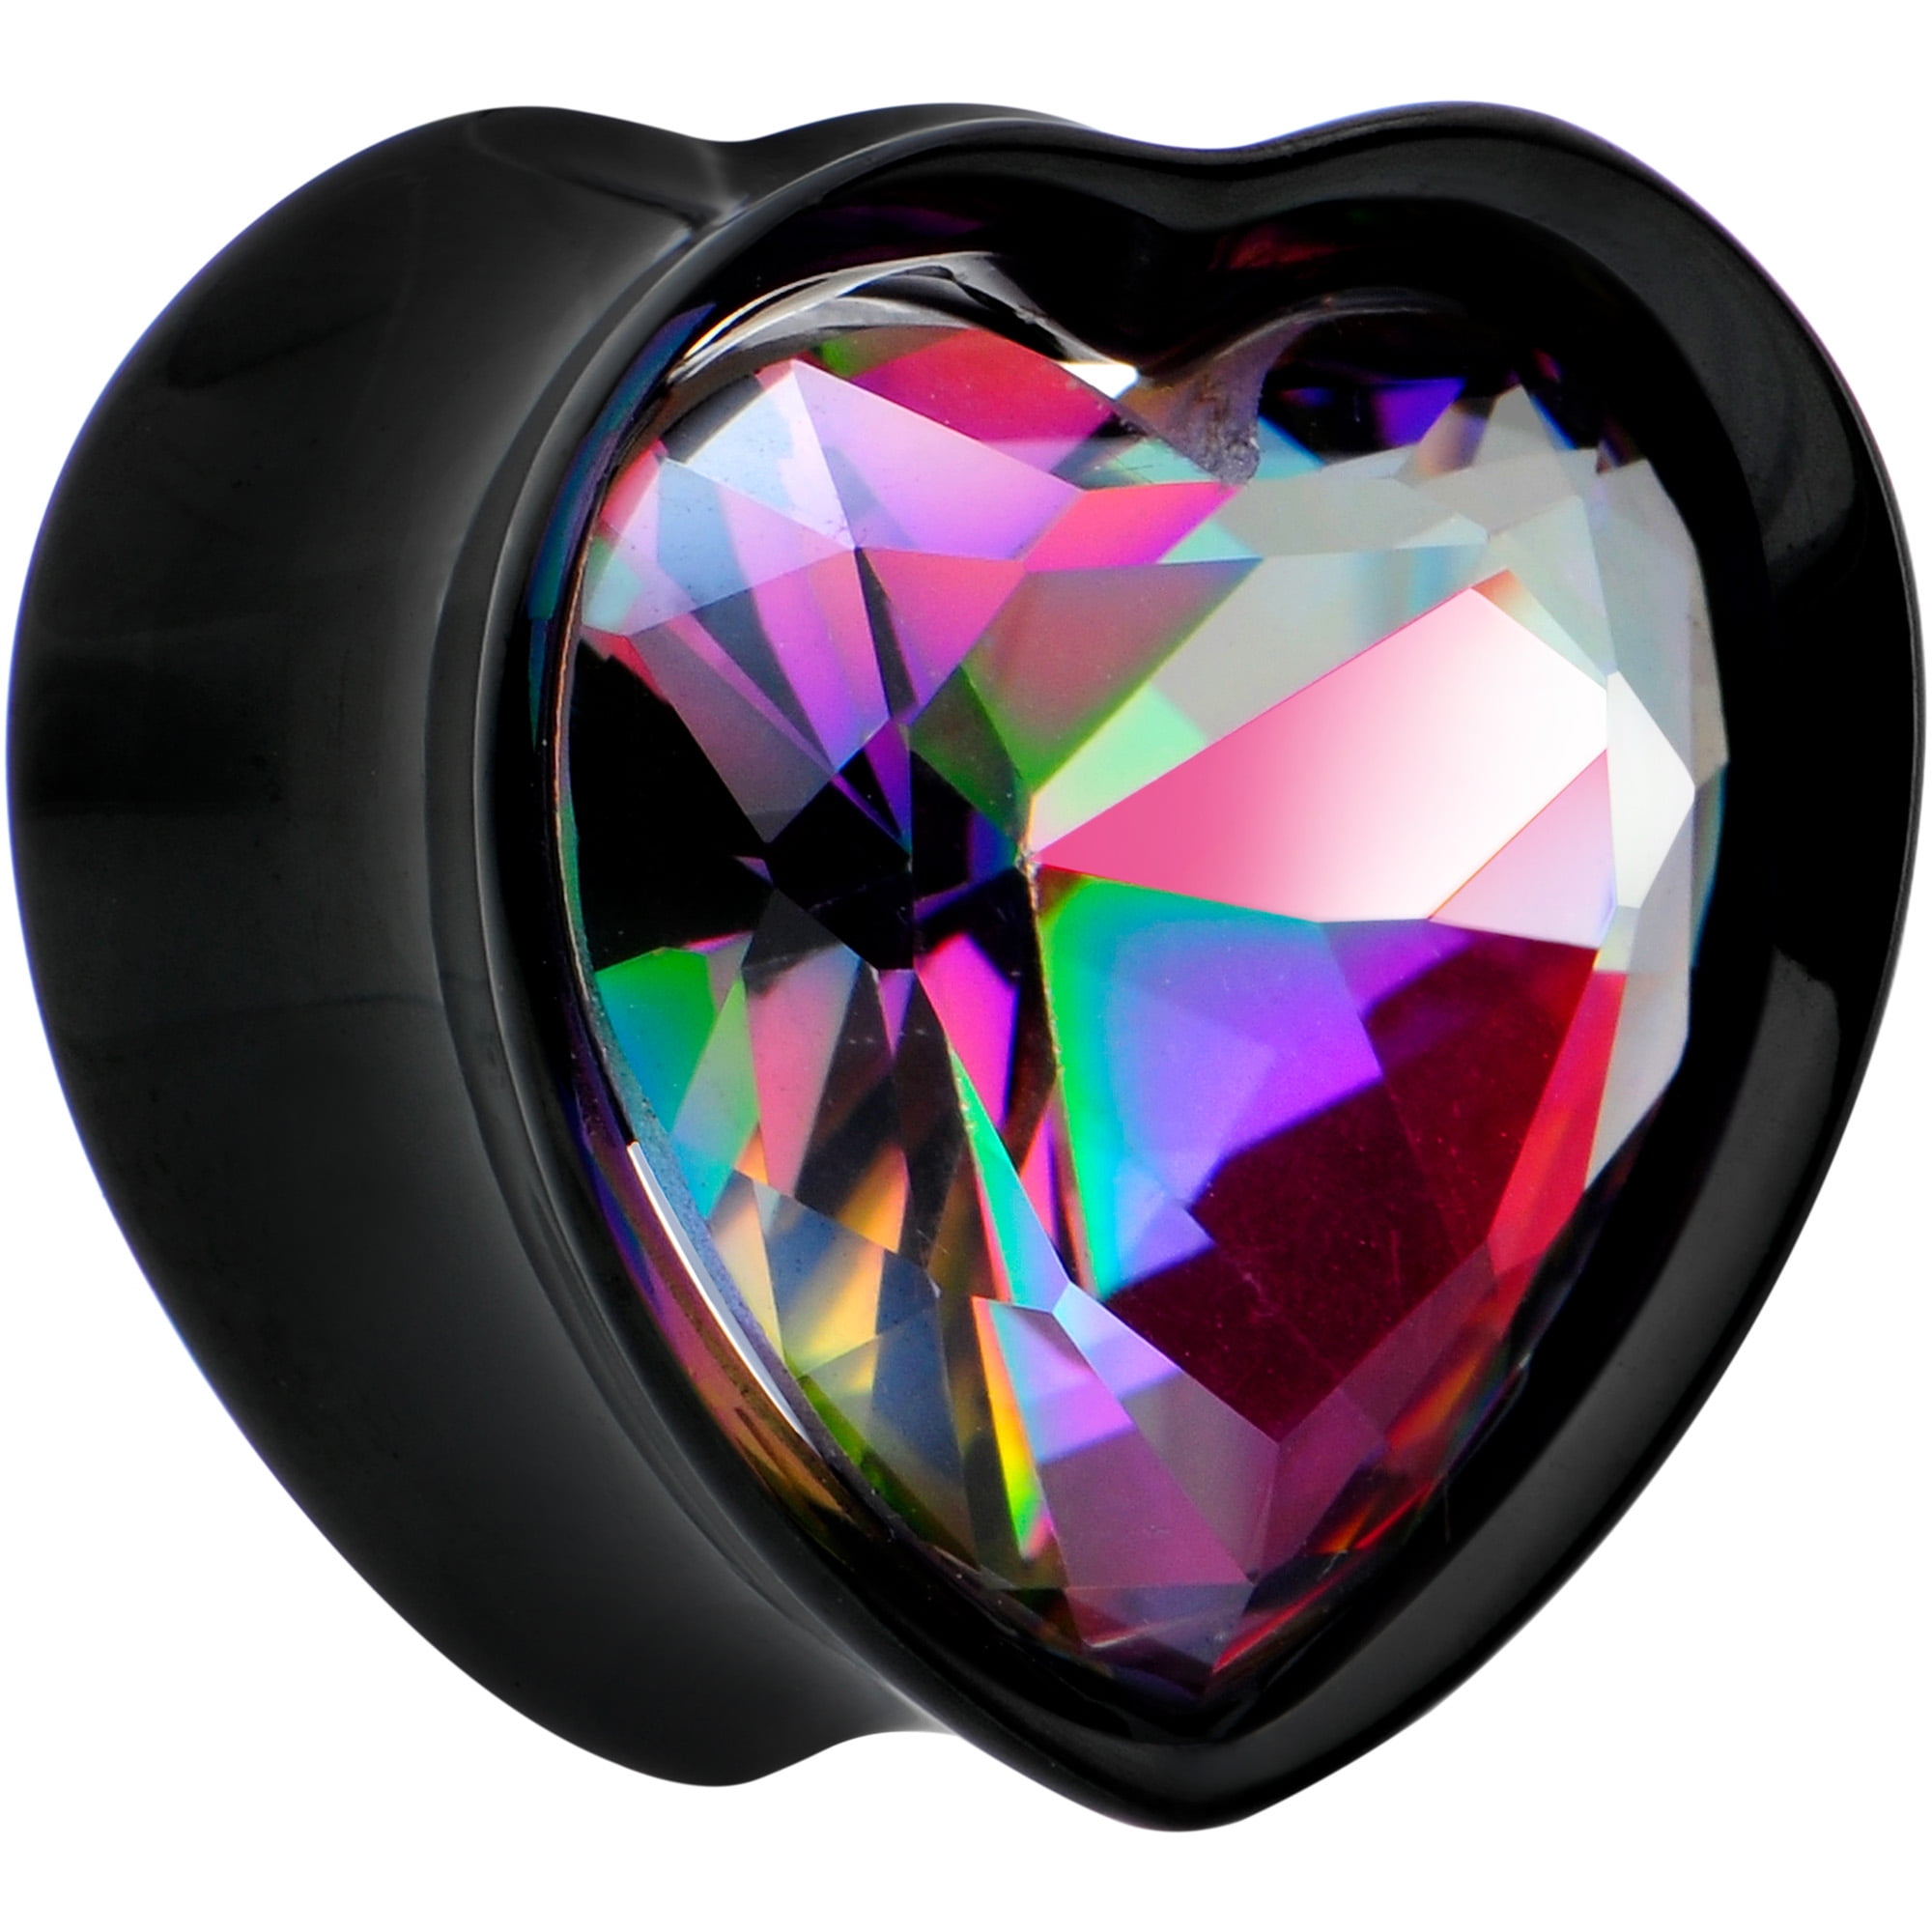 Body Candy Unisex 5/8 Stainless Steel Black Double Flare Heart Plug Earring  Ear Plug Gauges Set of 2